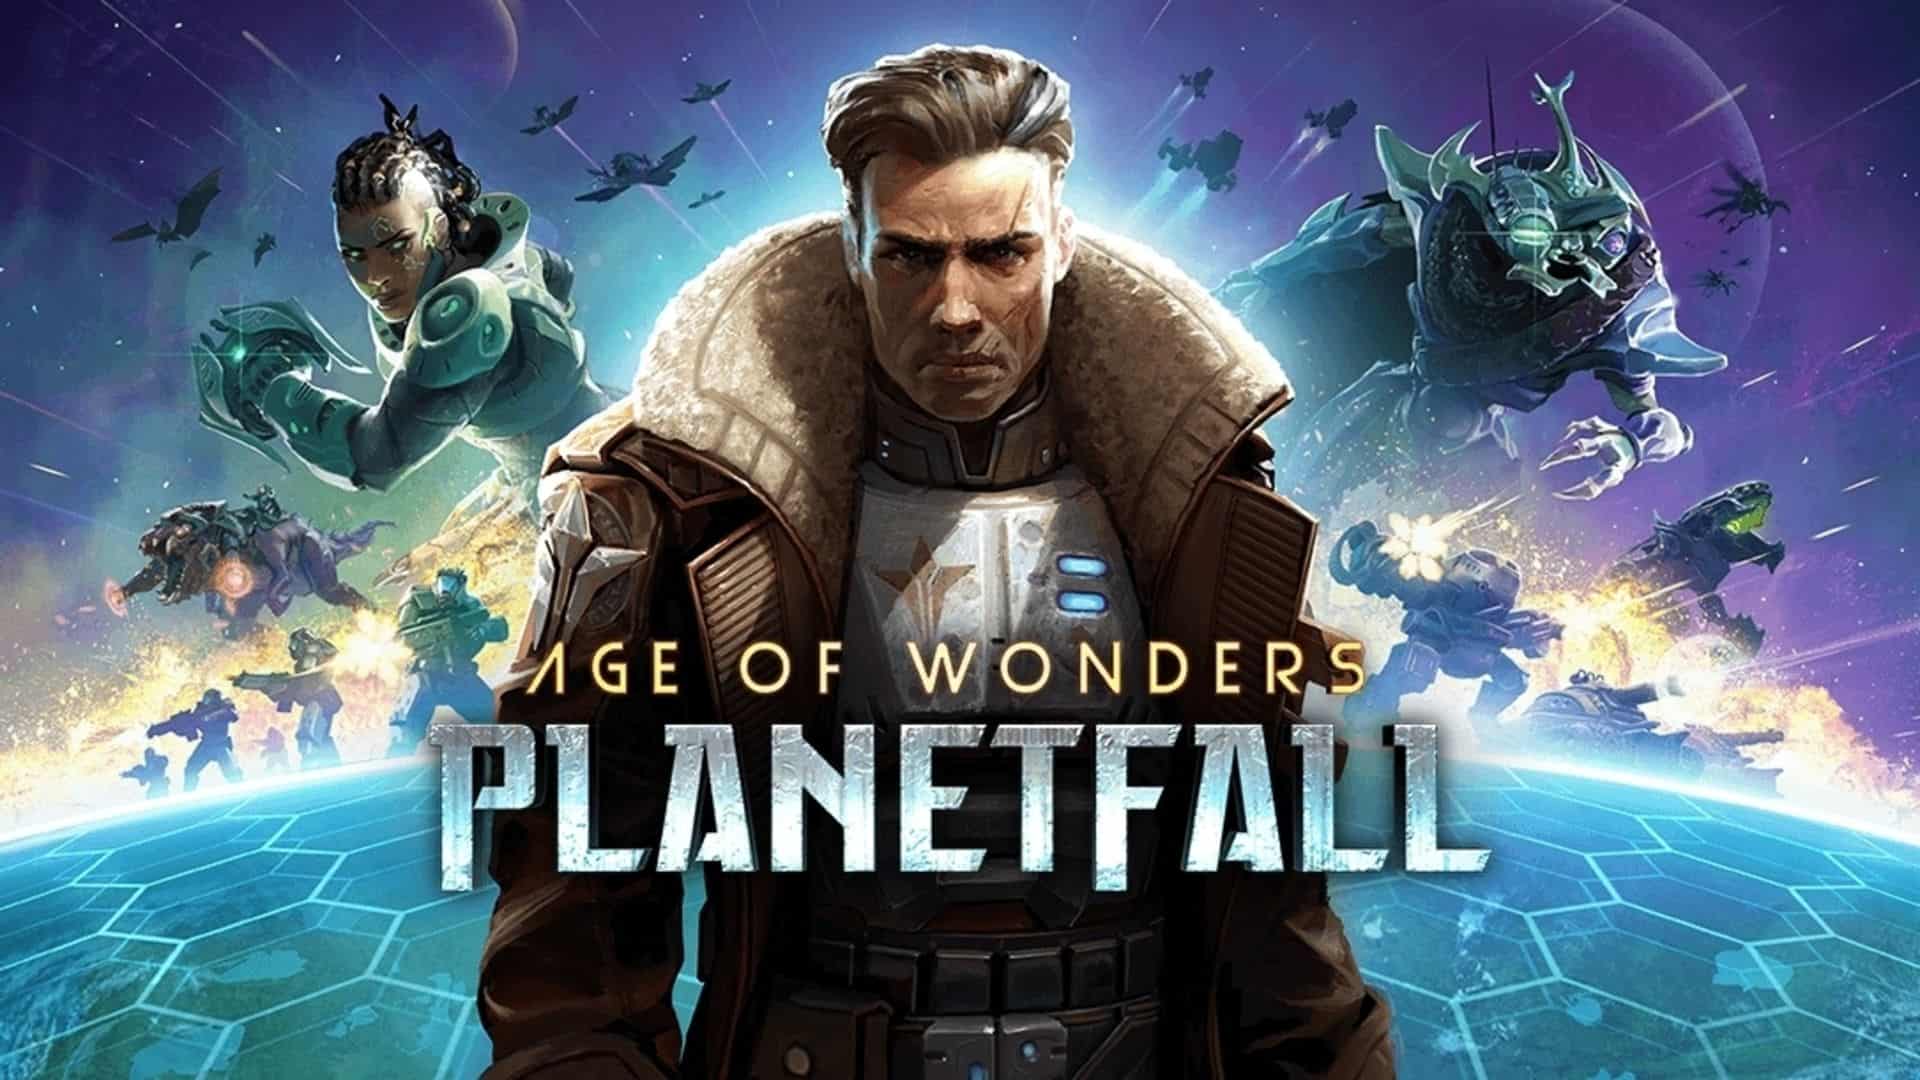 Age of Wonders: Planetfall Retail Versions Available For Pre-Order